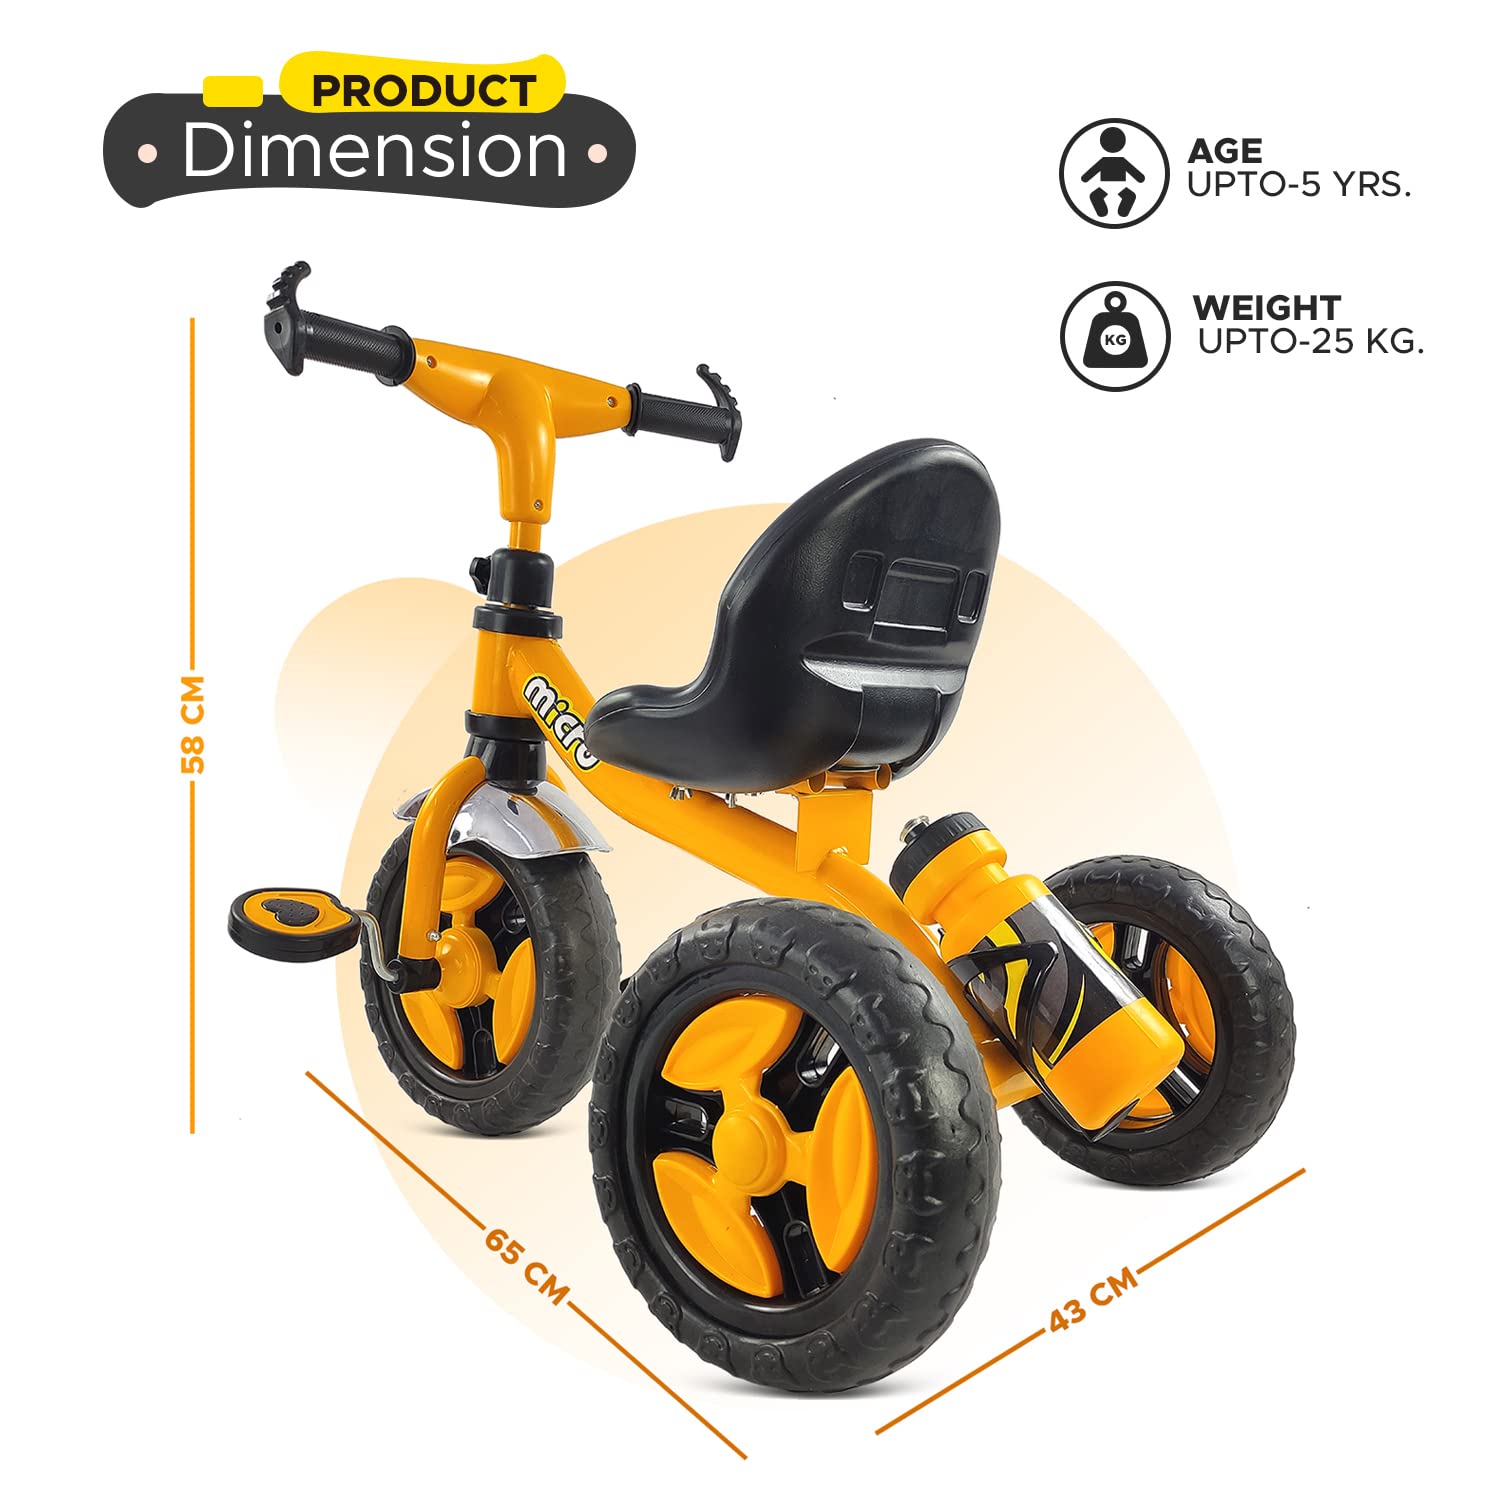 Dash Micro Cycle for Kids, Baby Cycle,Tricycle, Kids Cycle, Tricycle for Kids for 3 Years to 5 Years with Sipper